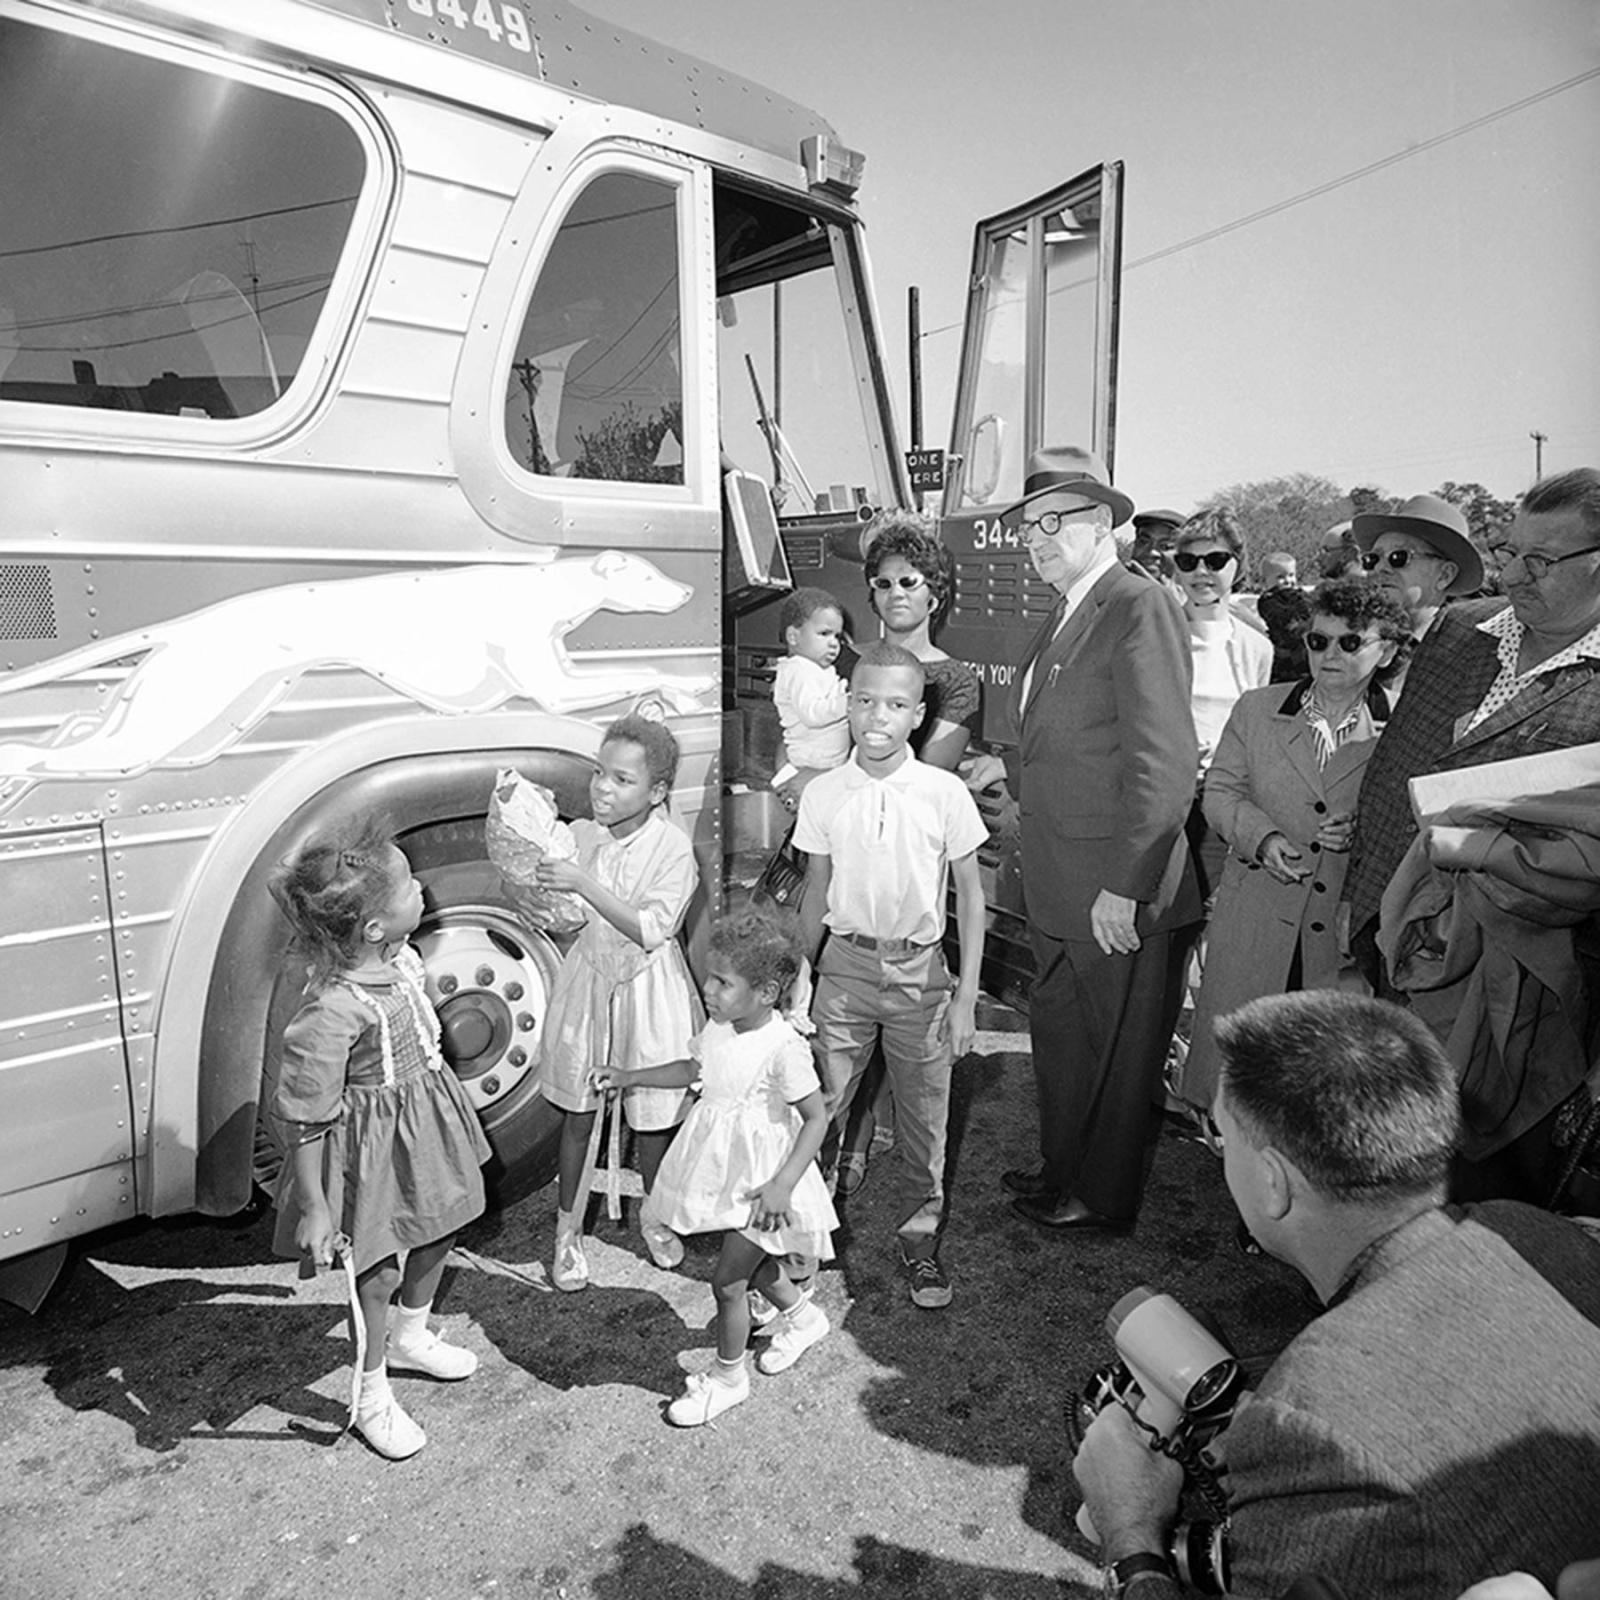 Frank C. Curtin, Reverse Freedom Riders was taken by Frank C. Curtin, Associated Press, 1962